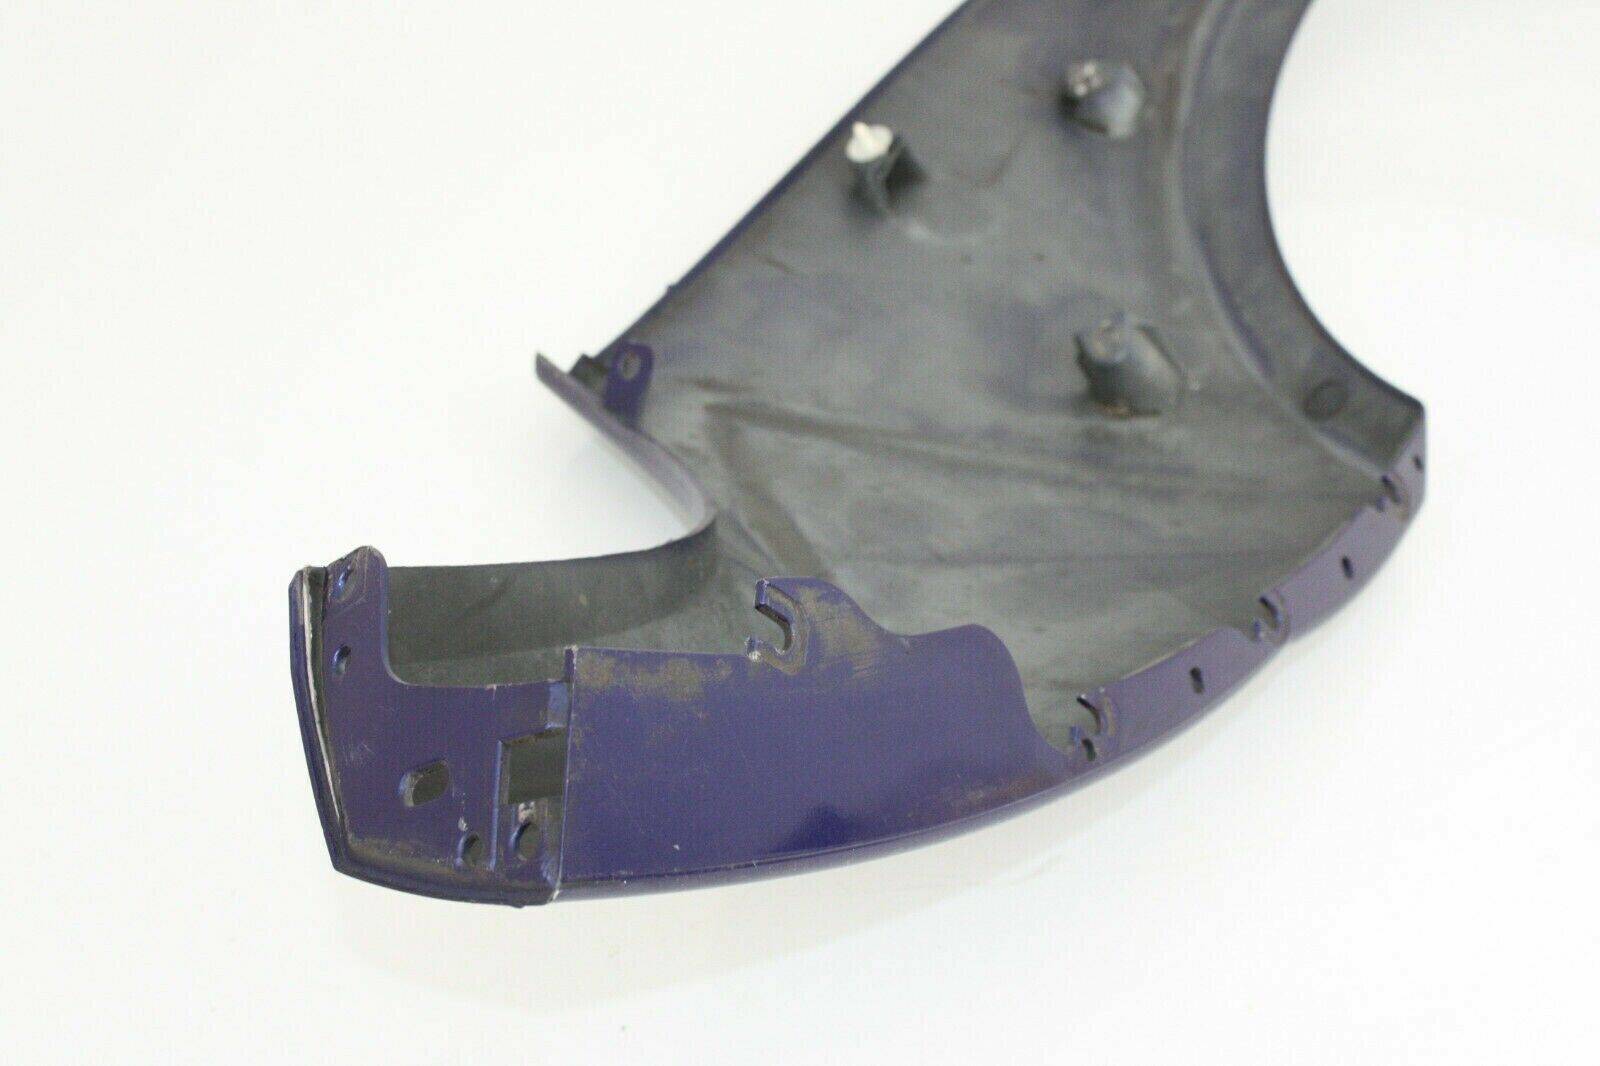 FORD-KA-SPORTKA-REAR-BUMPER-RIGHT-LOWER-SECTION-2003-TO-2008-175430905120-6